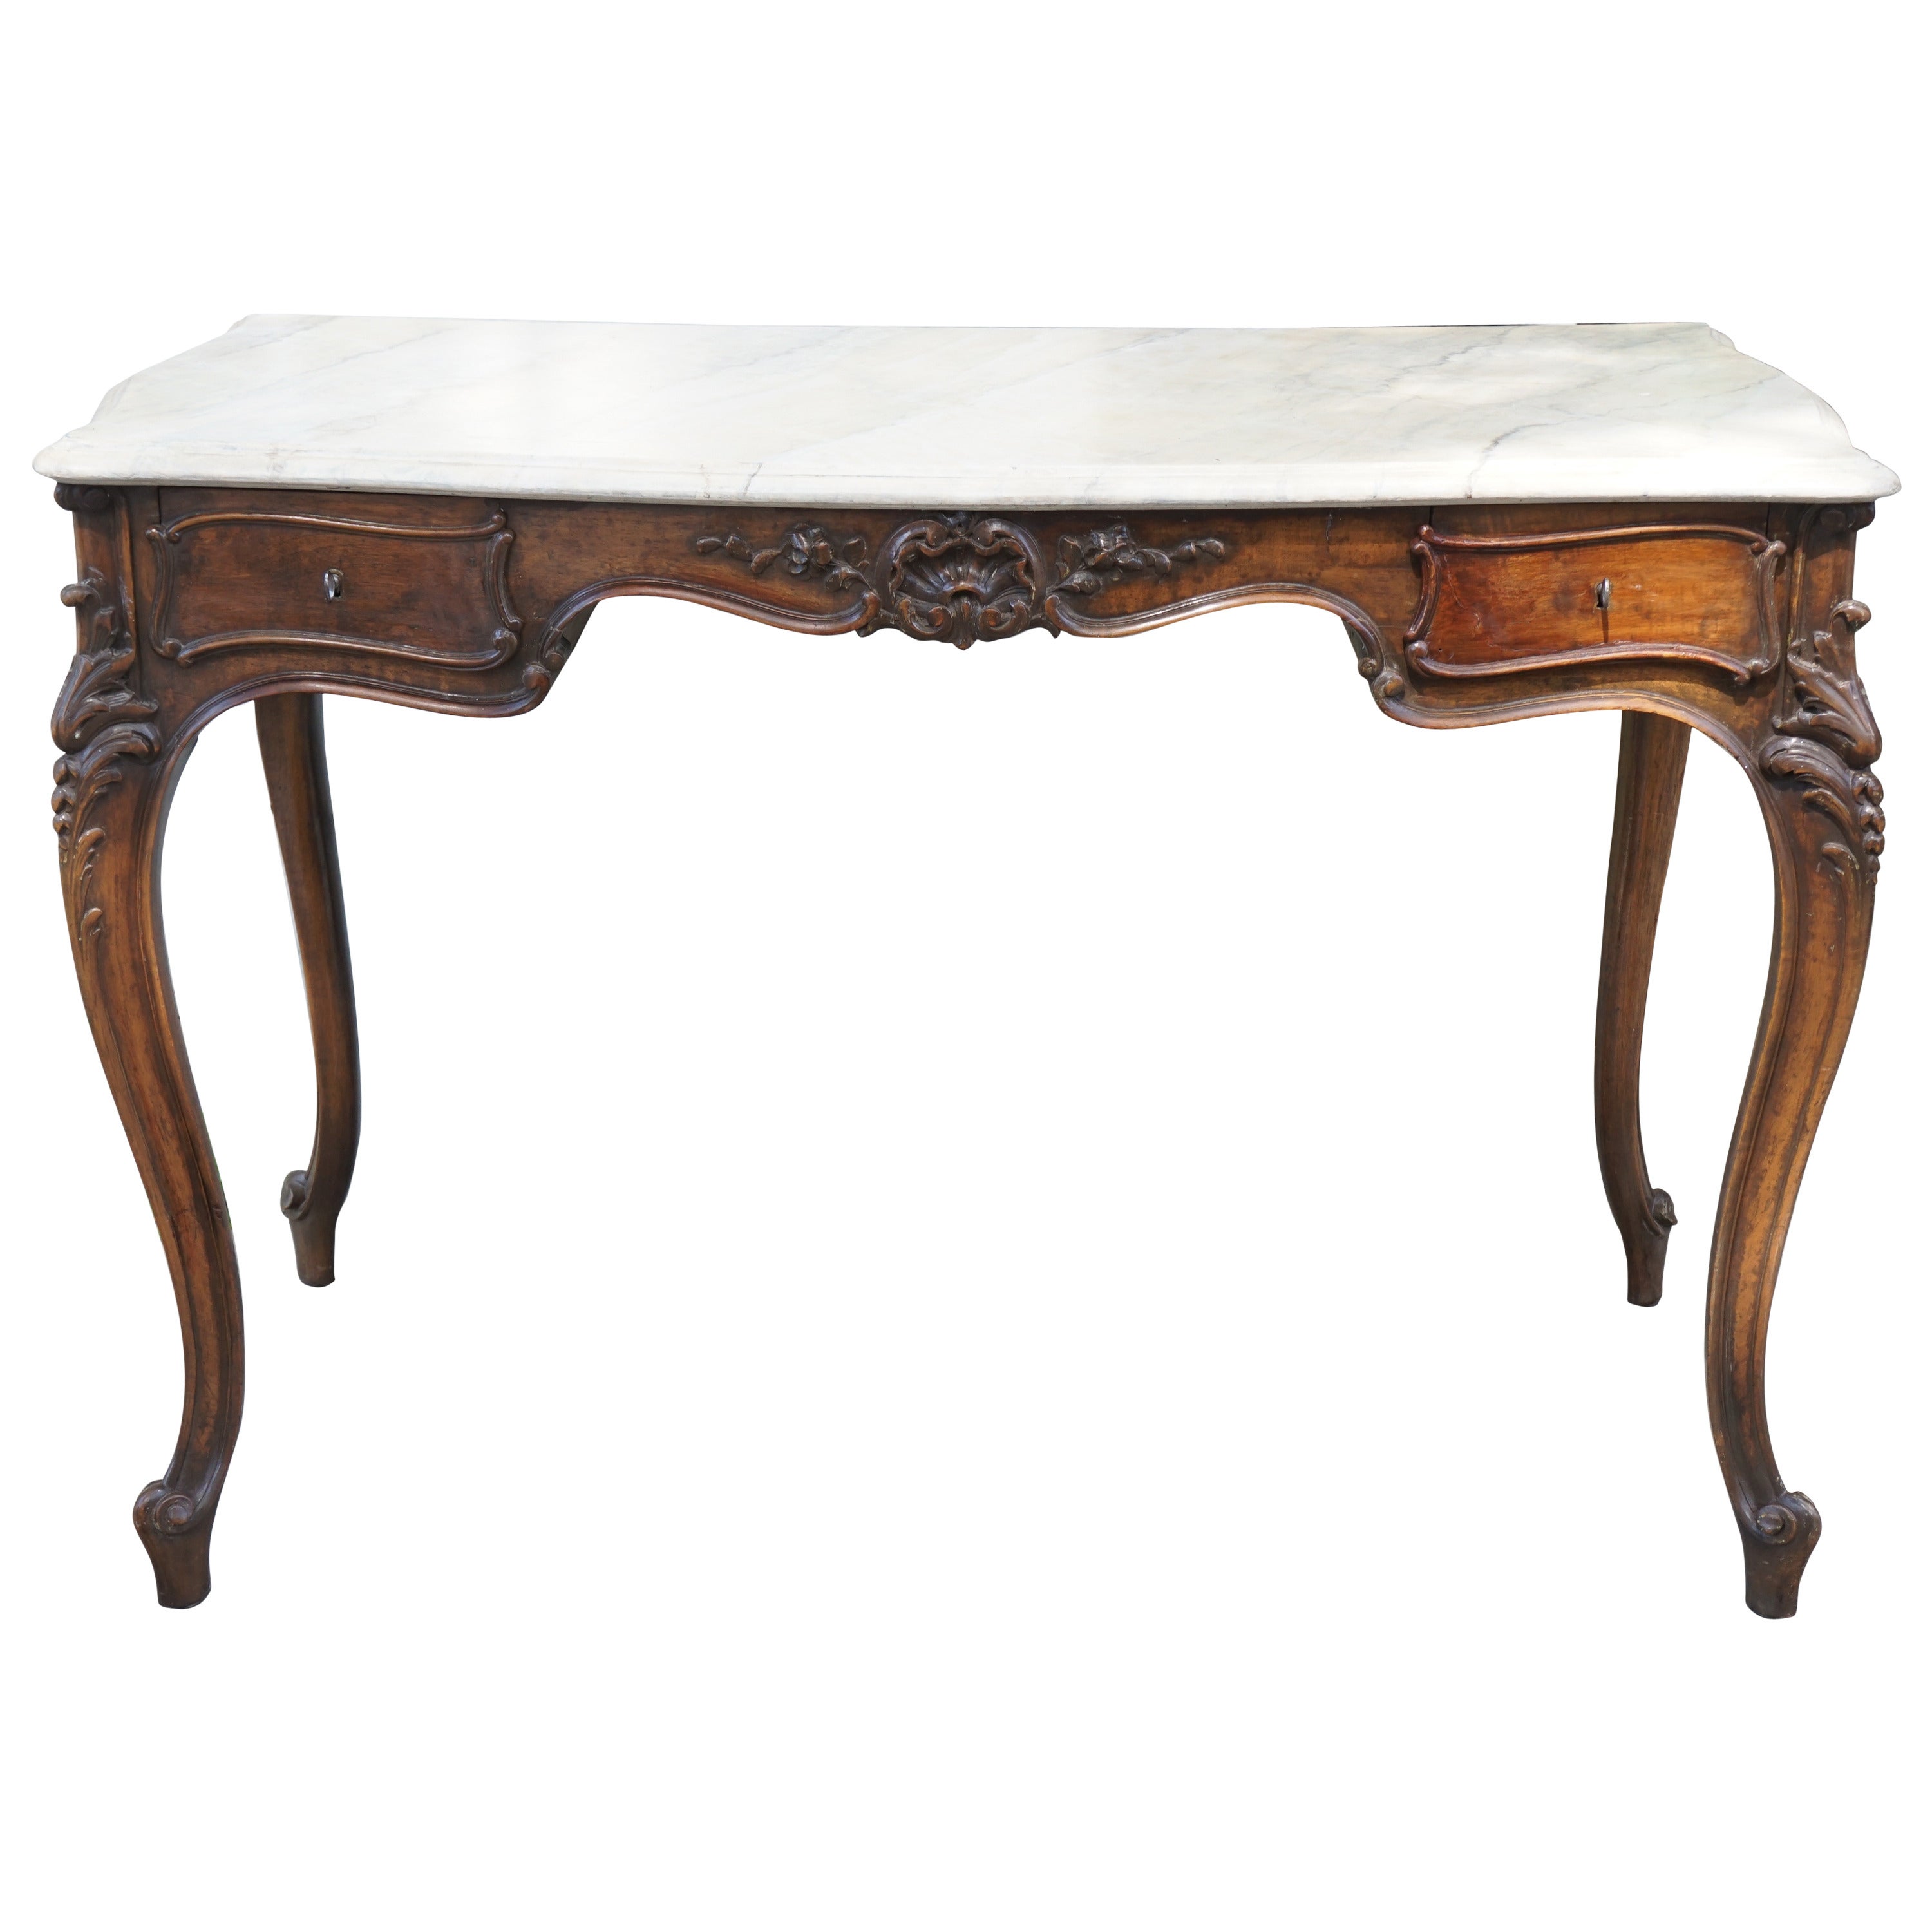 Late 19th Century French Walnut Desk from the Estate of Paul & Bunny Mellon